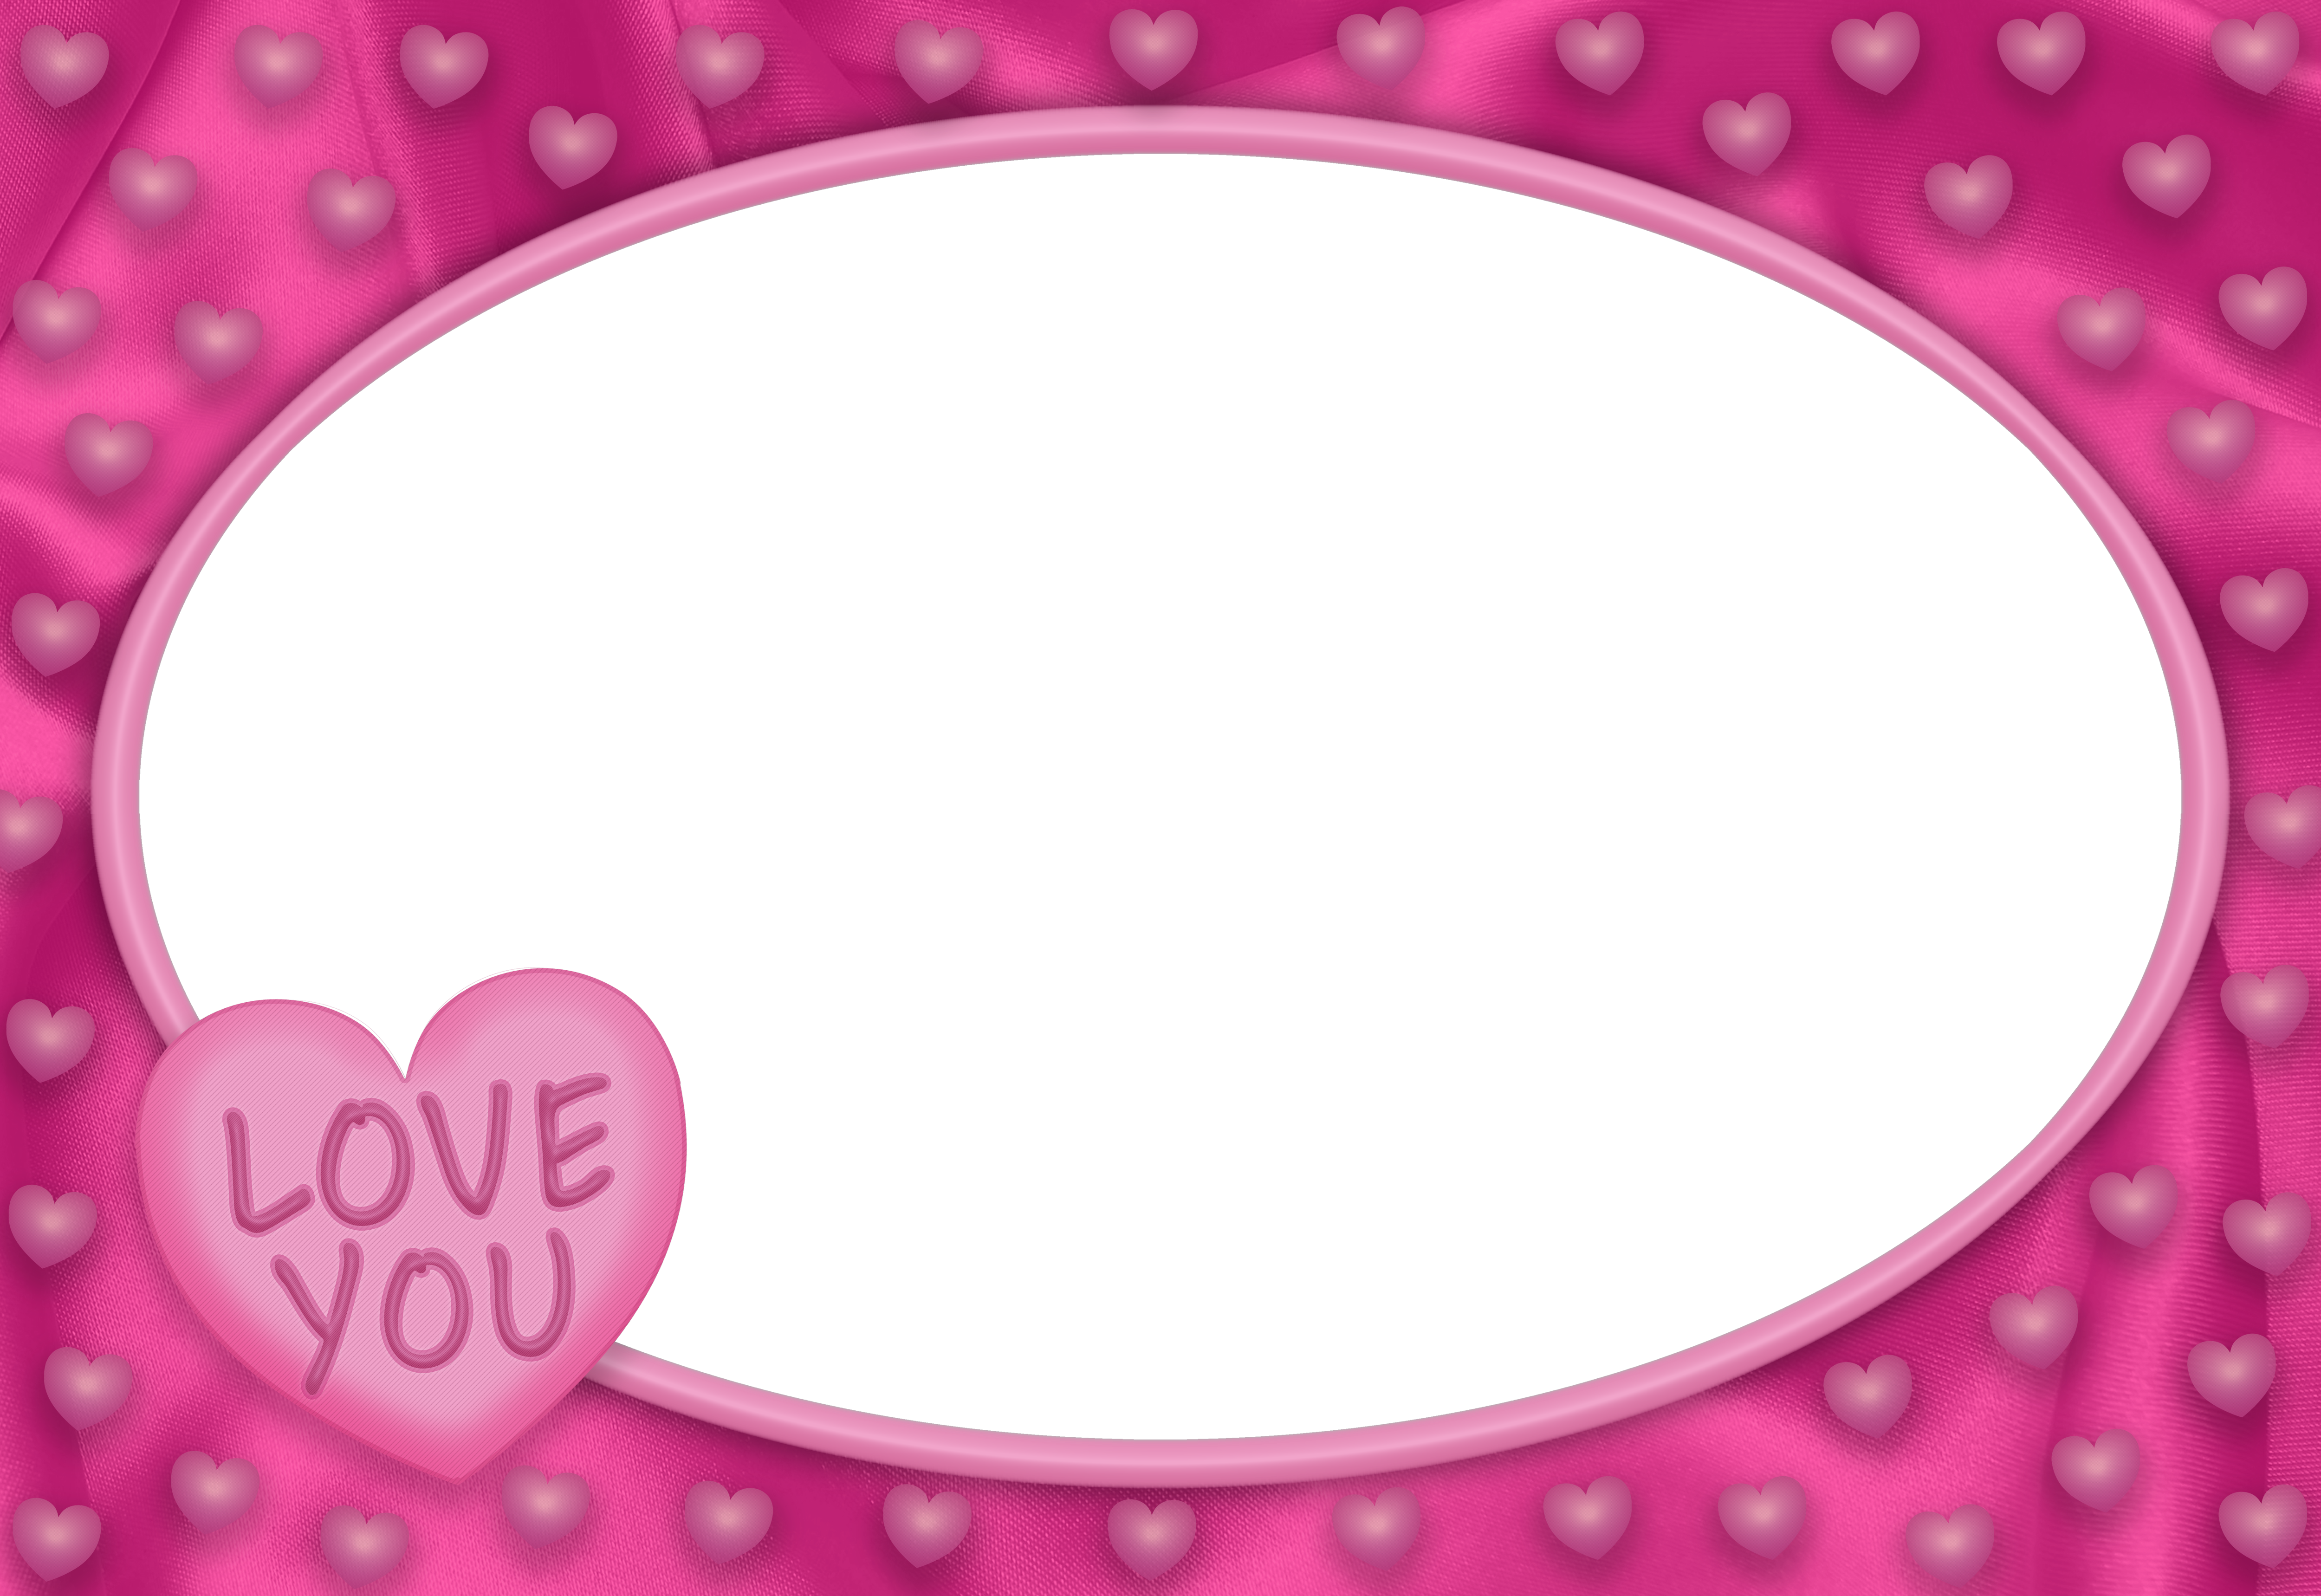 Love You Png Frame Gallery Yopriceville High Quality Images And Transparent Png Free Clipart